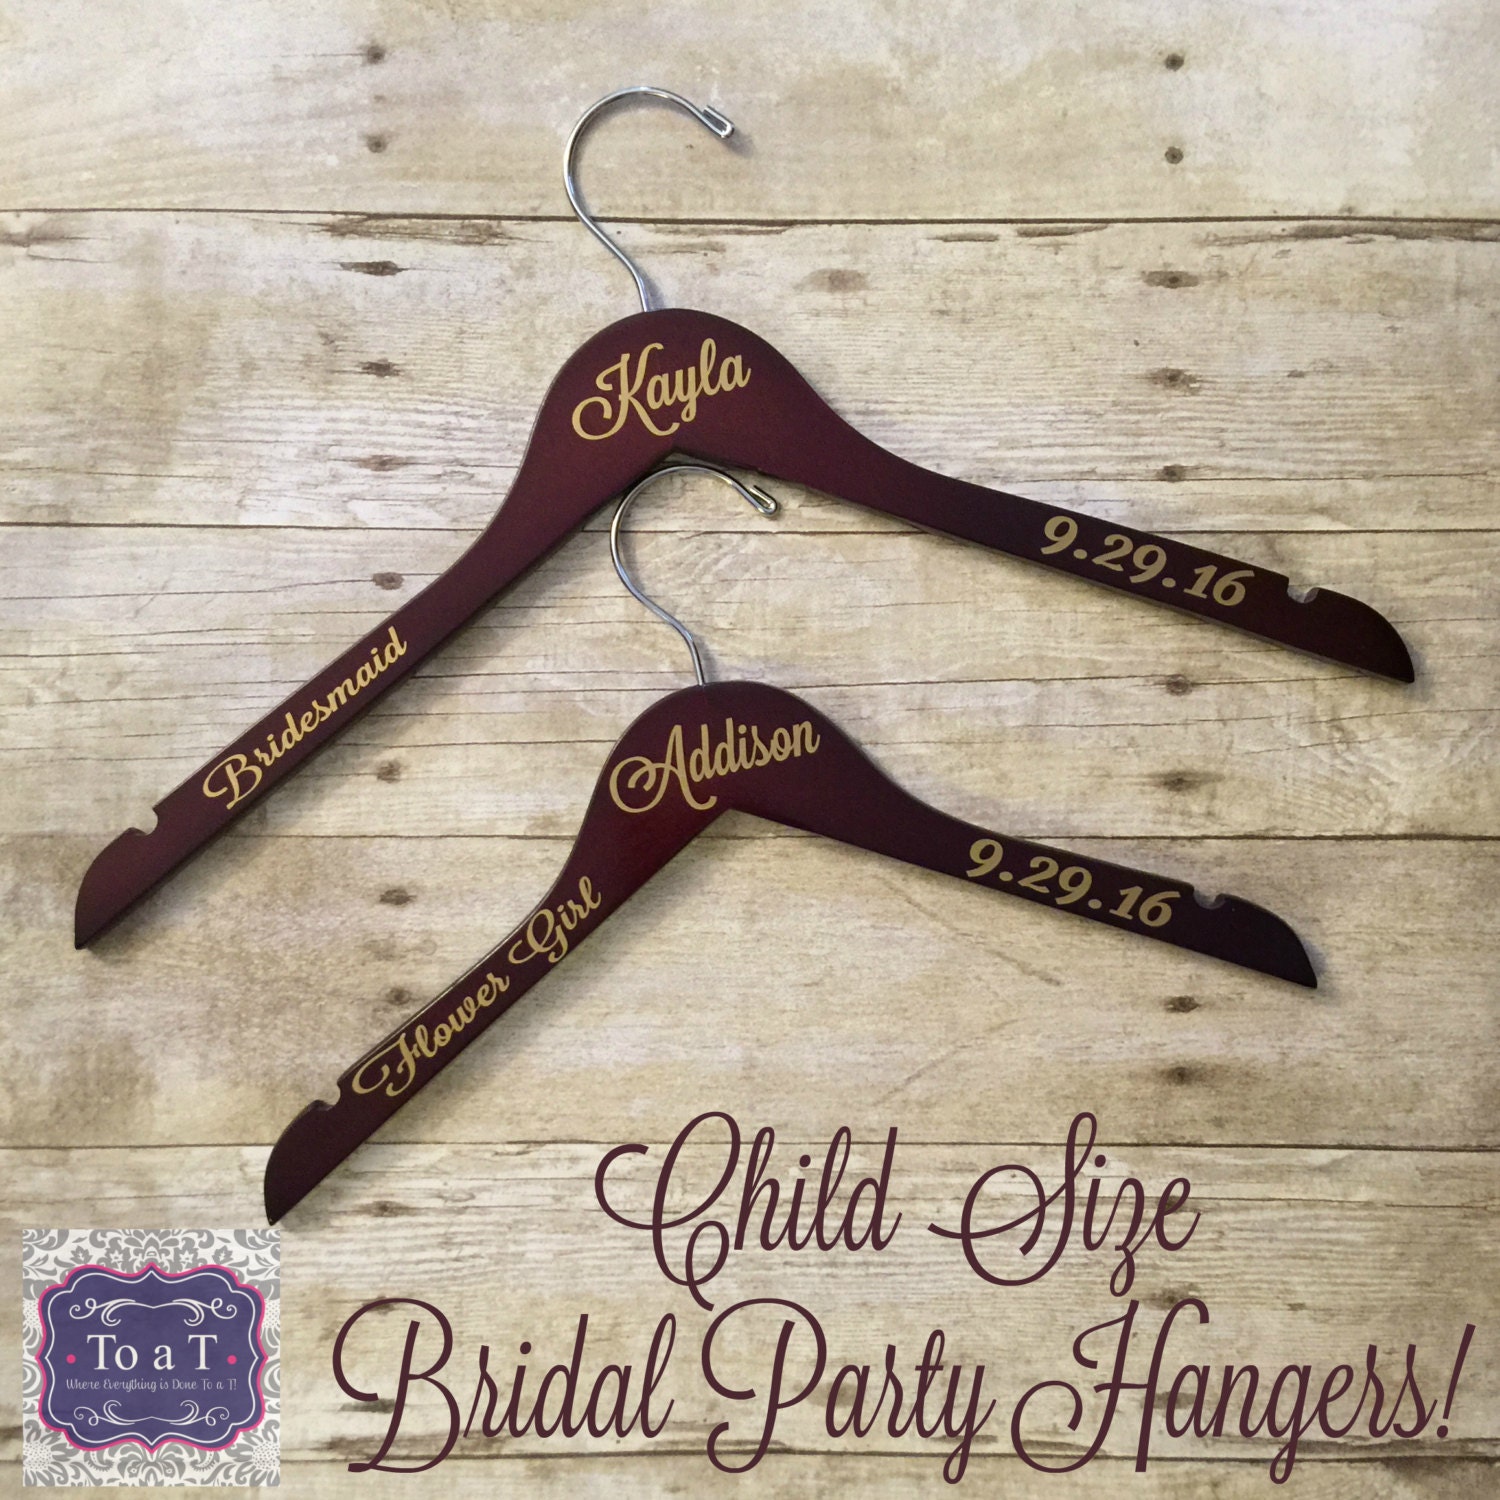 Child Size Bridal Party Hangers Perfect for Flower Girl or Jr Bridesmaid |Custom Wedding Hanger Personalized Wedding Hanger